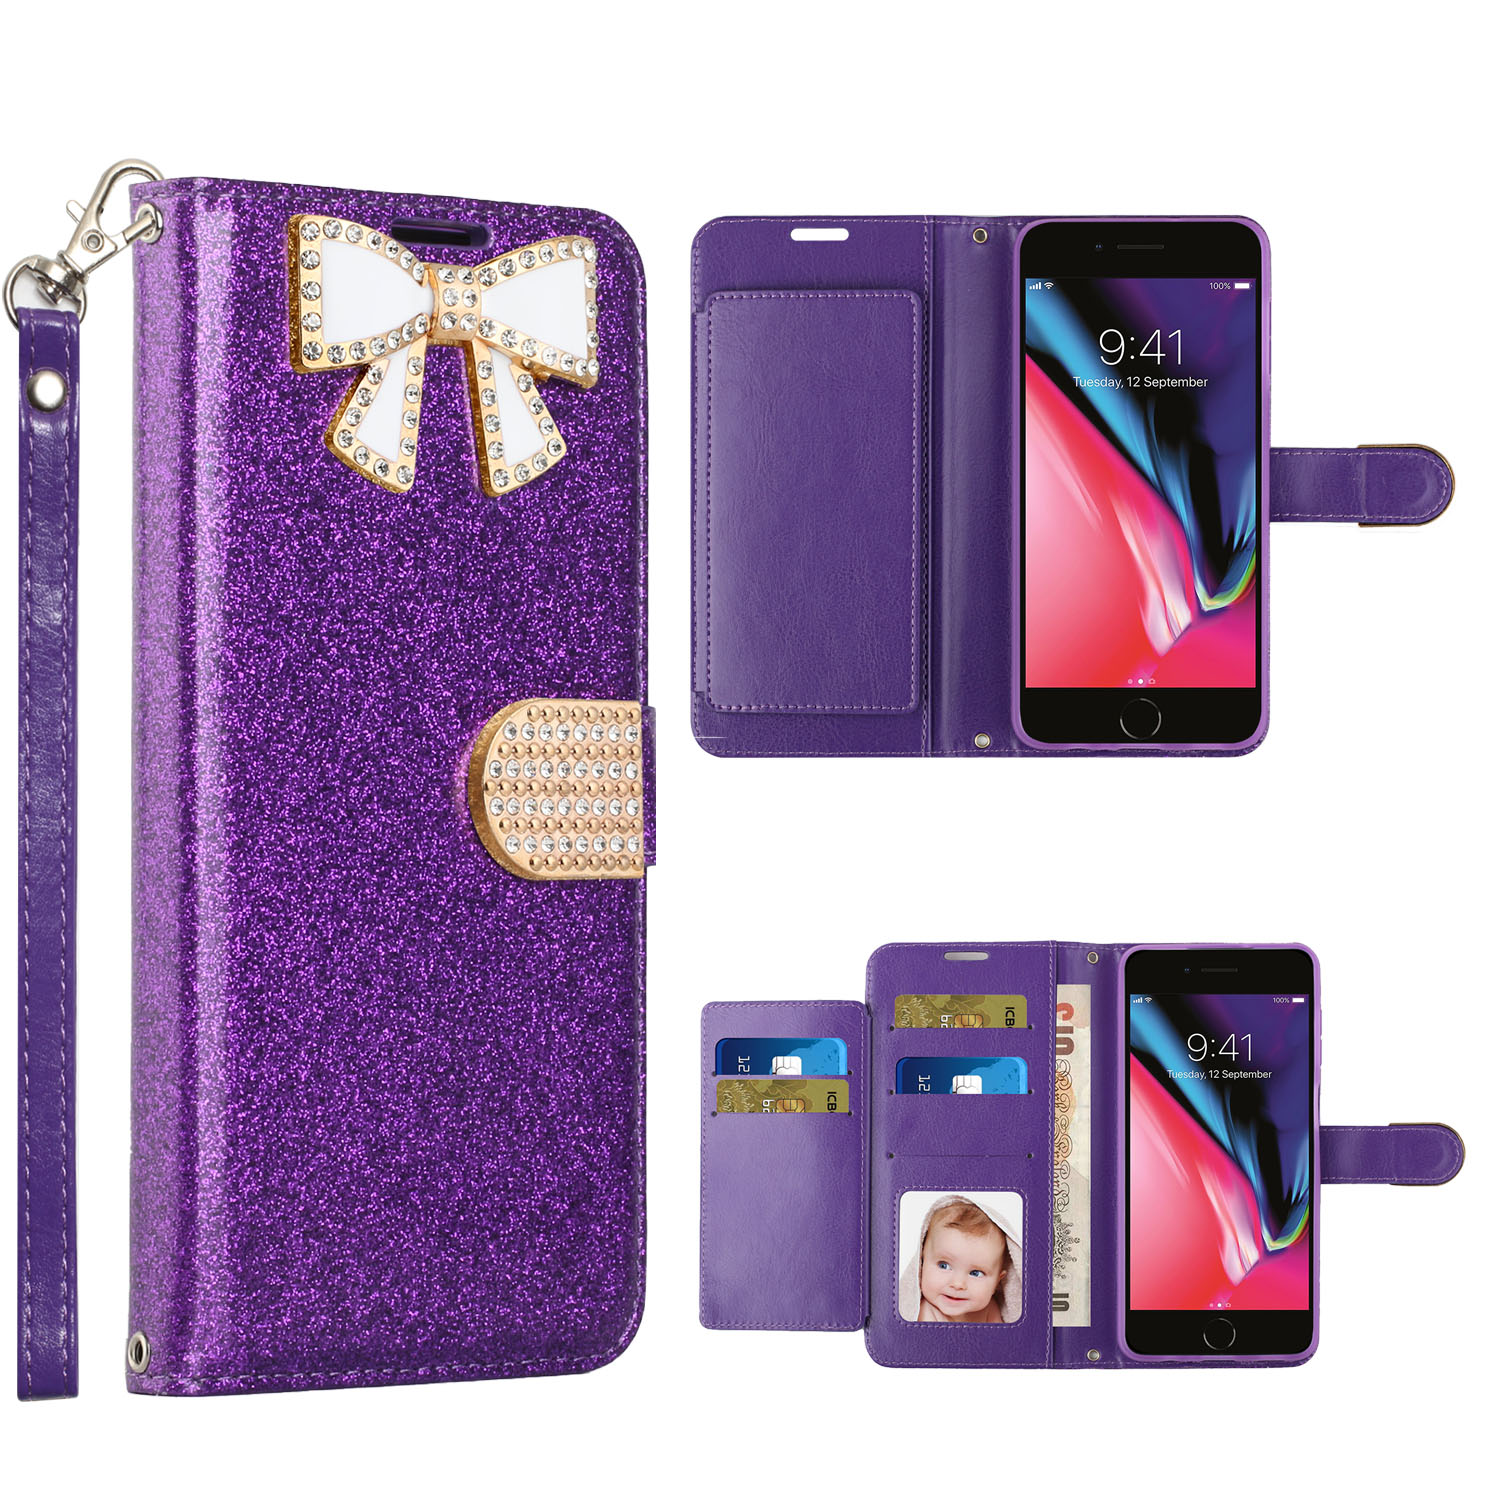 Ribbon Bow Crystal Diamond WALLET Case for Apple iPhone 11 [6.1] (Purple)